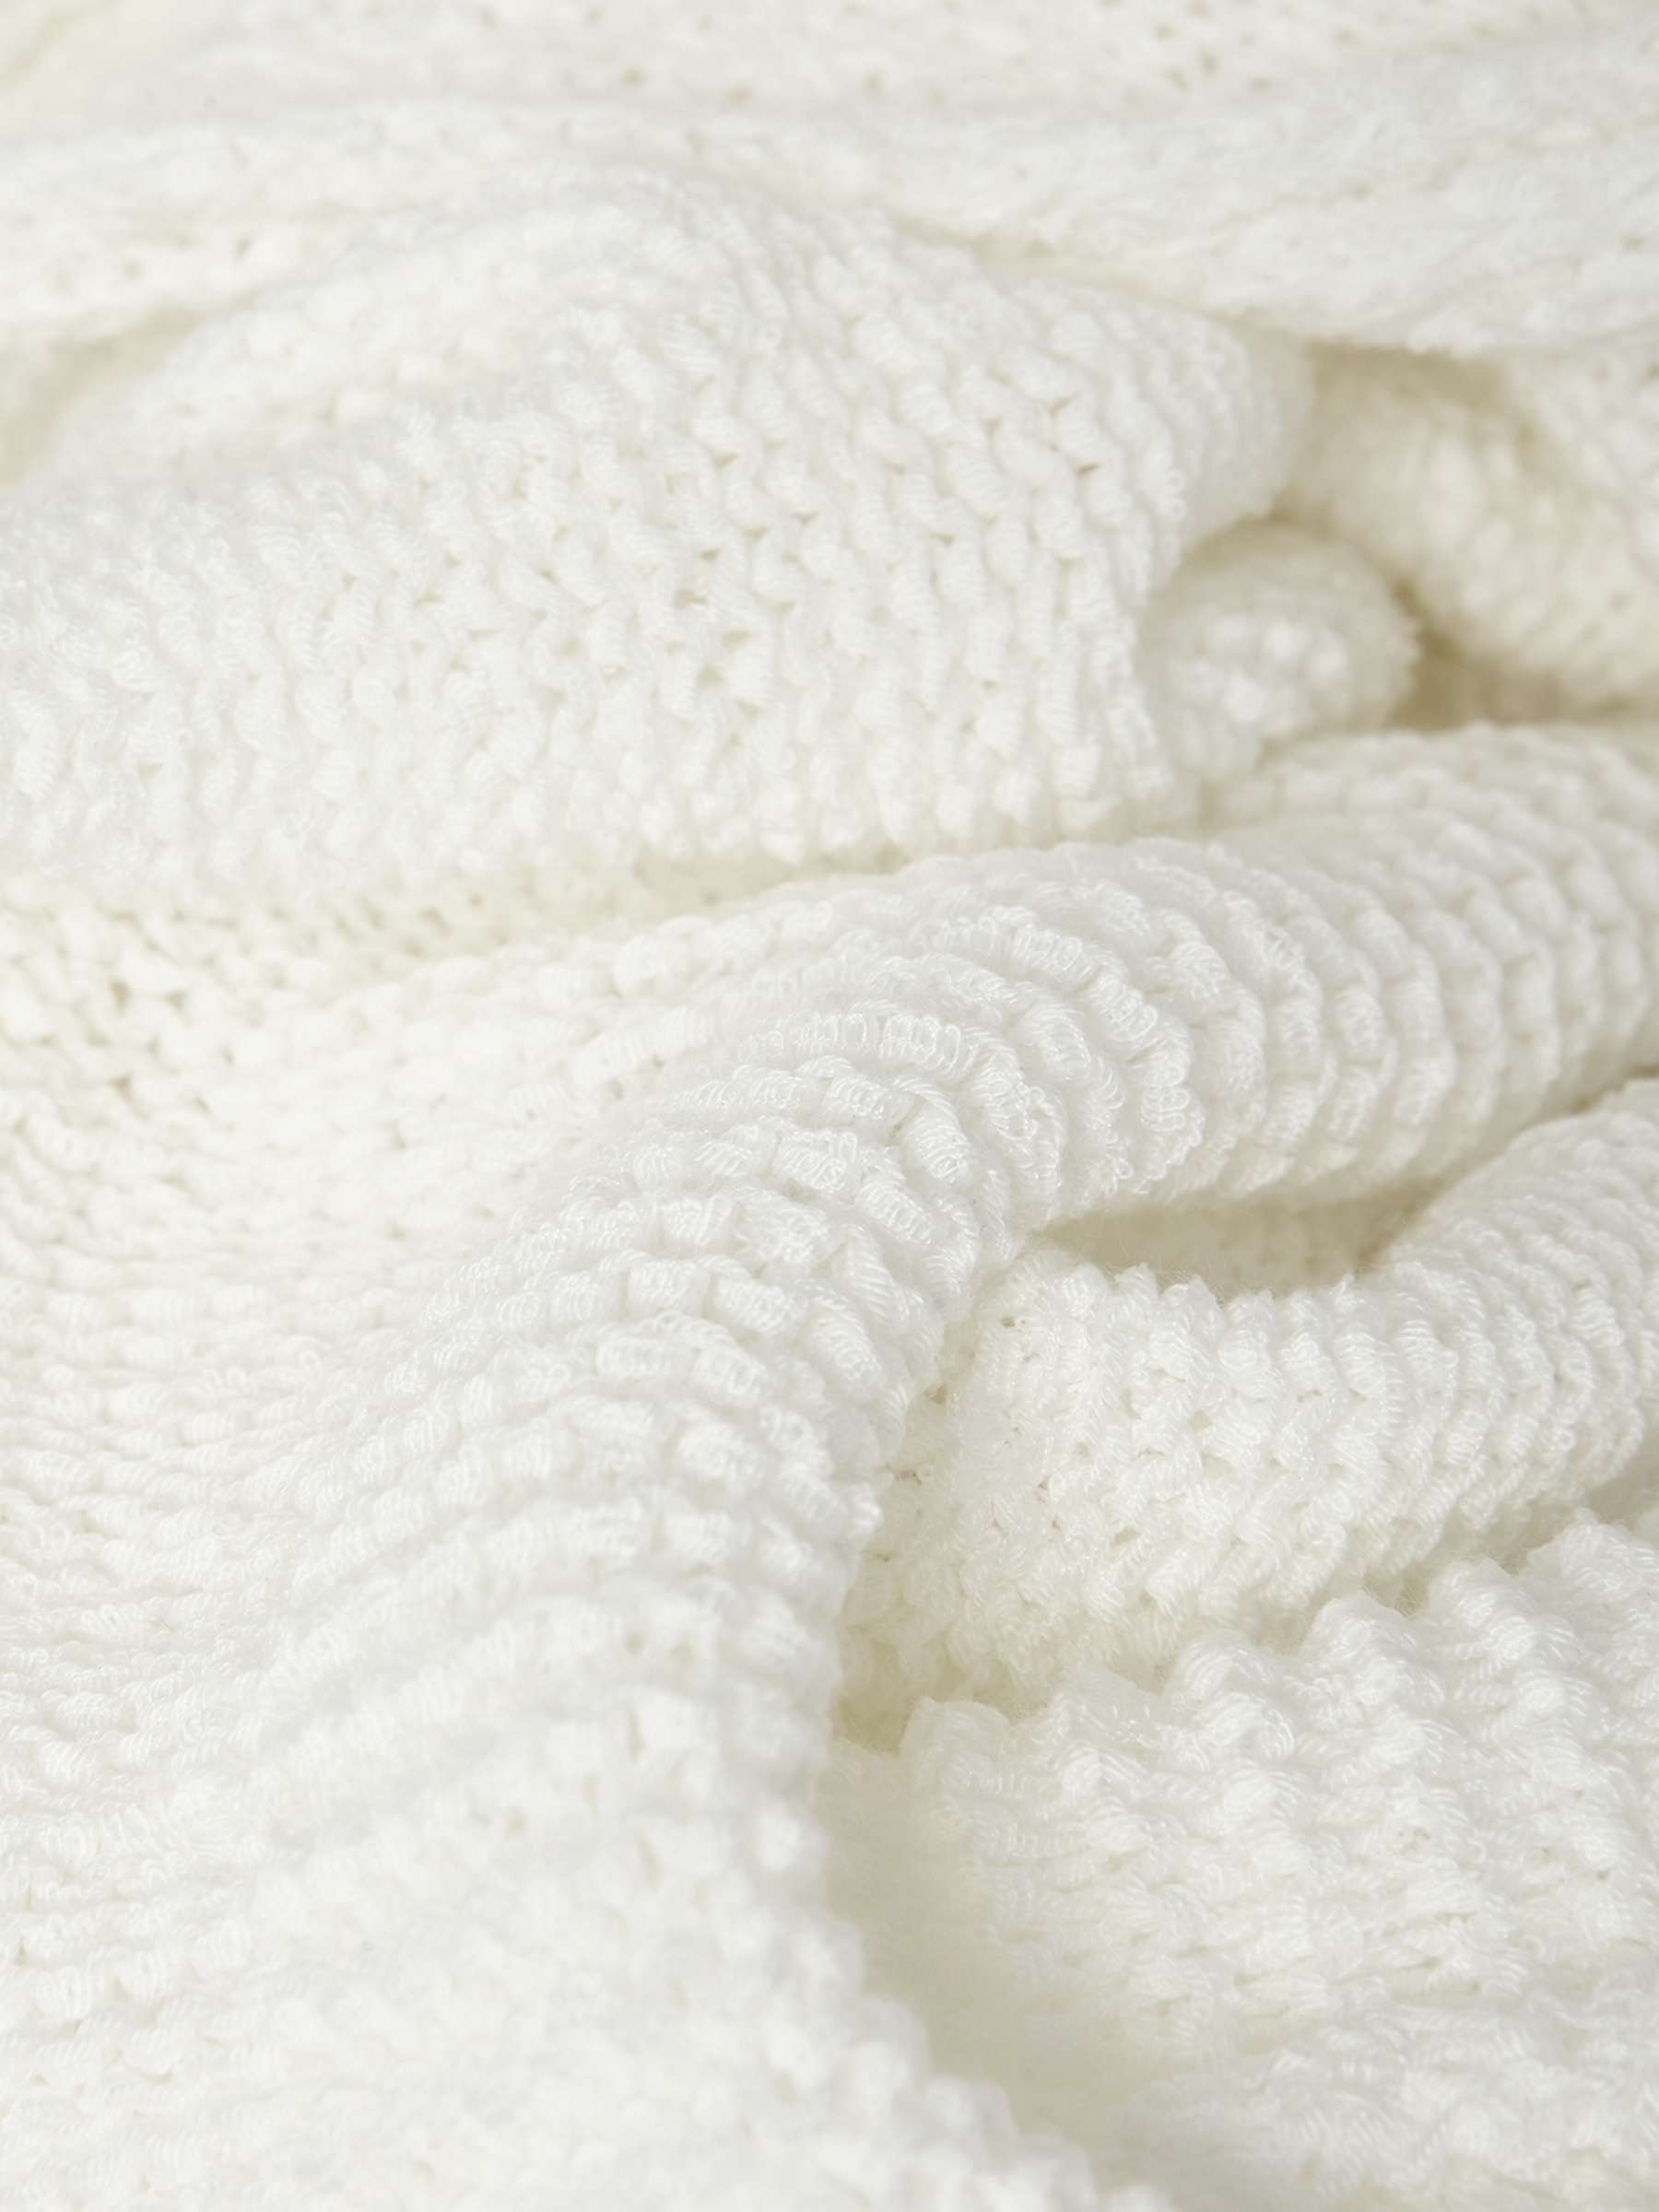 Buy Phase Eight Alana Textured Knit, White Online at johnlewis.com